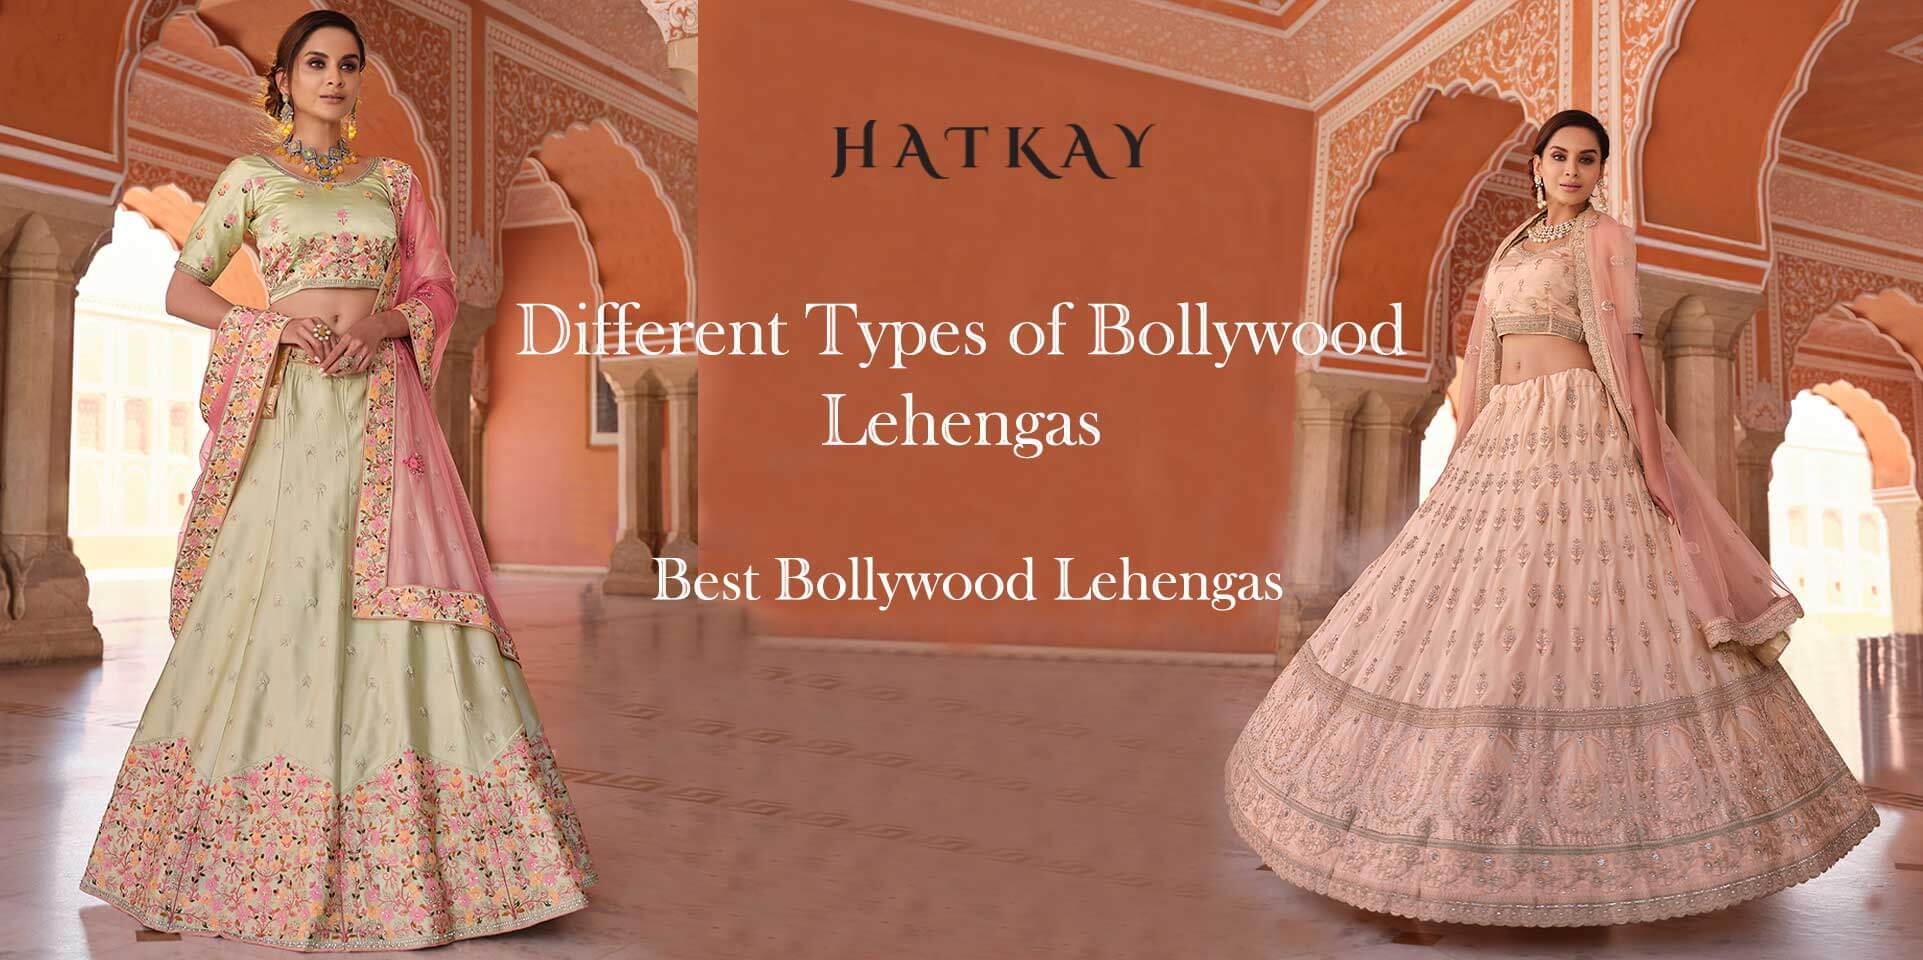 What are the Different Types of Bollywood Lehengas? Which is the Best?